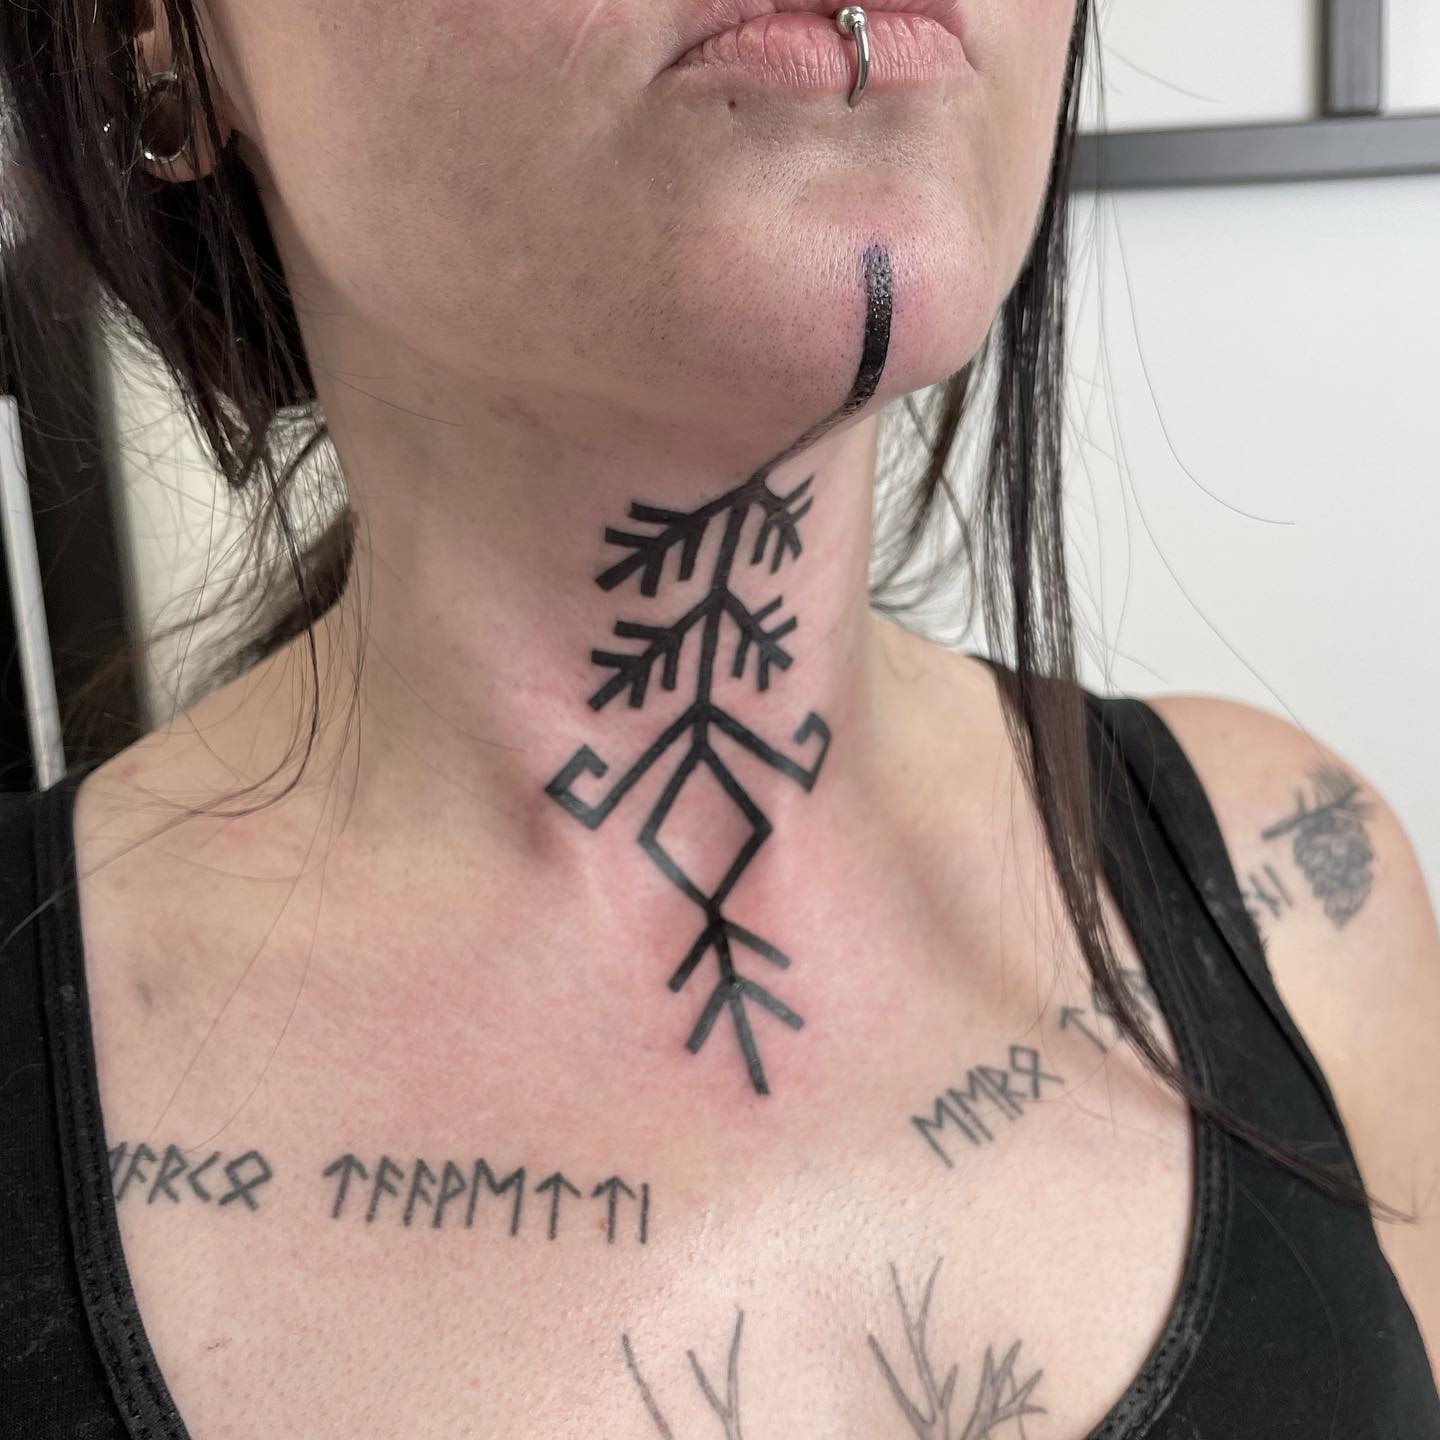 Here is a quirky design that belongs to Ancient Finnish symbolism. Thousands of years ago, it was much more common to get this kind of culture related tattoos. If you want to get back to the roots of yours, try this tattoo out.